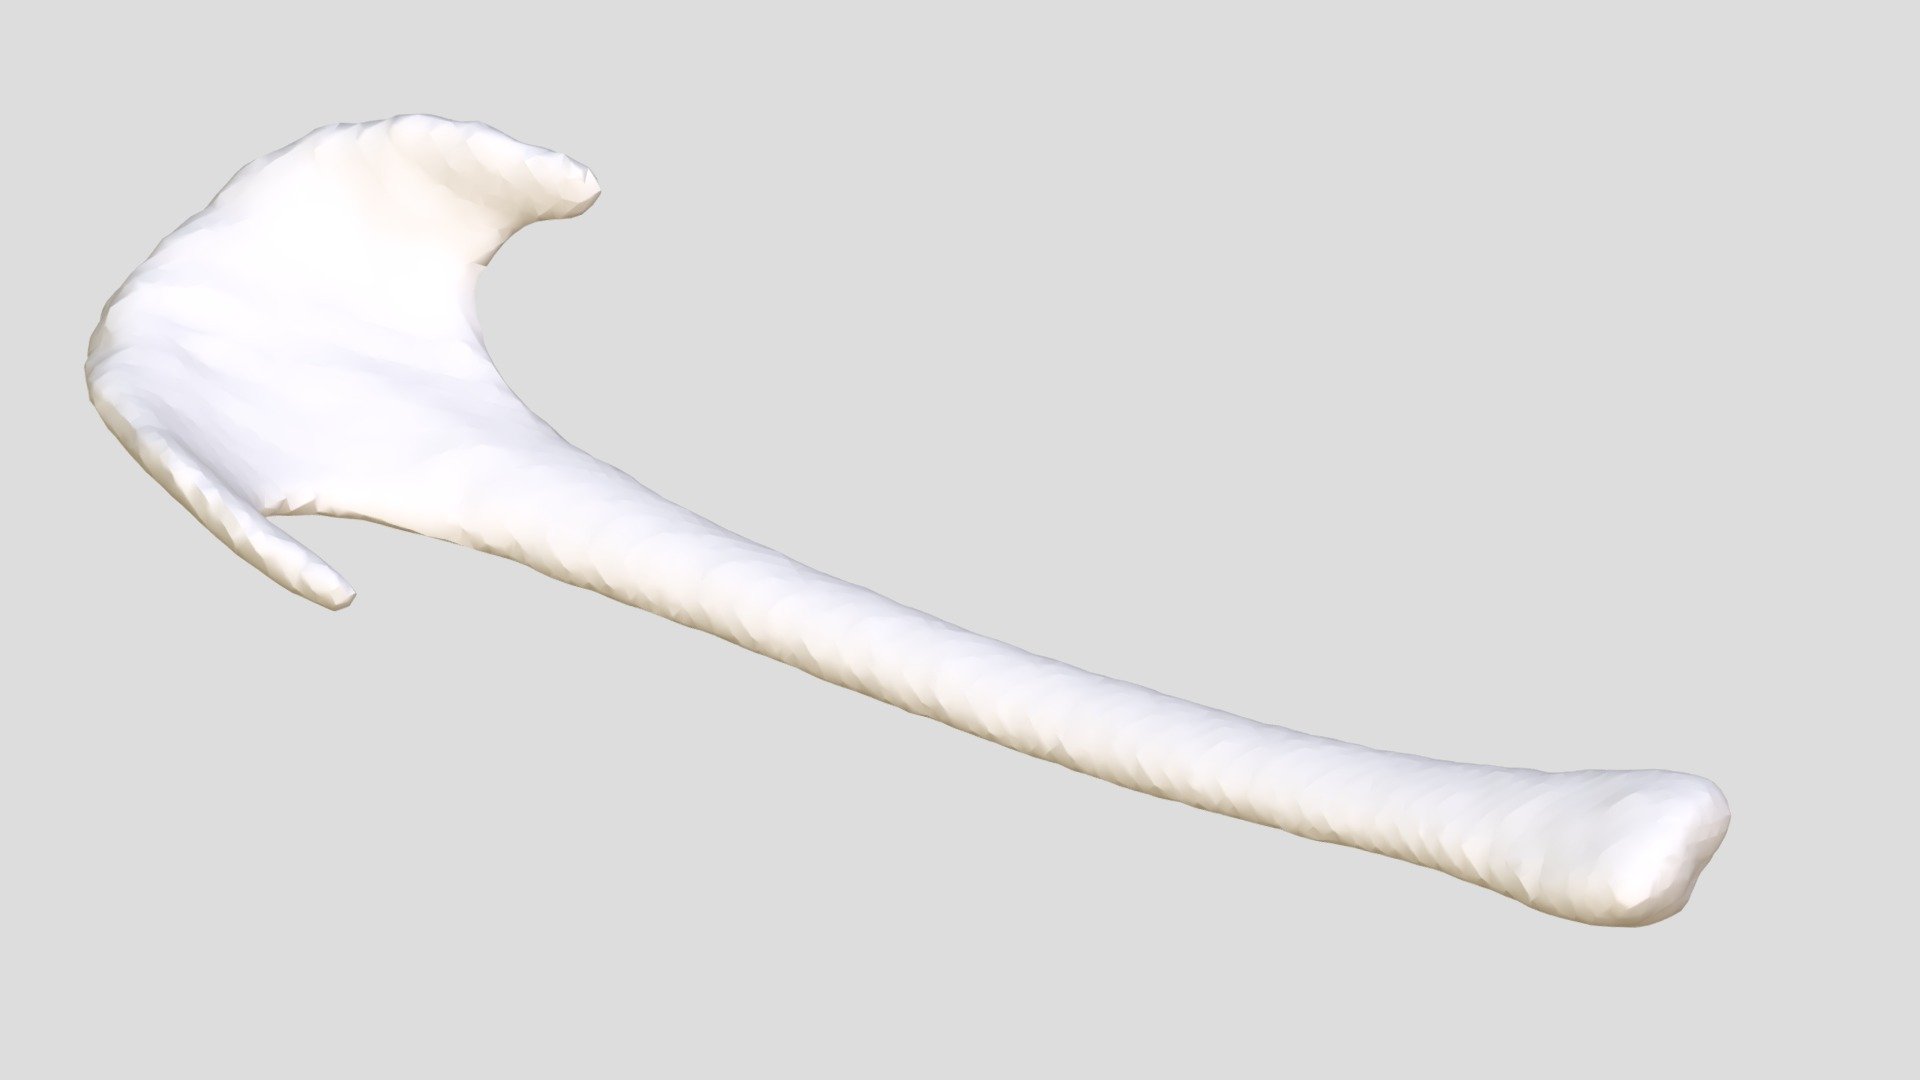 MSB:Mamm:93984 (Division of Mammals, Museum of Southwestern Biology, University of New Mexico) - Cavia fulgida - Baculum - 3D model by Biodiversity 3d model